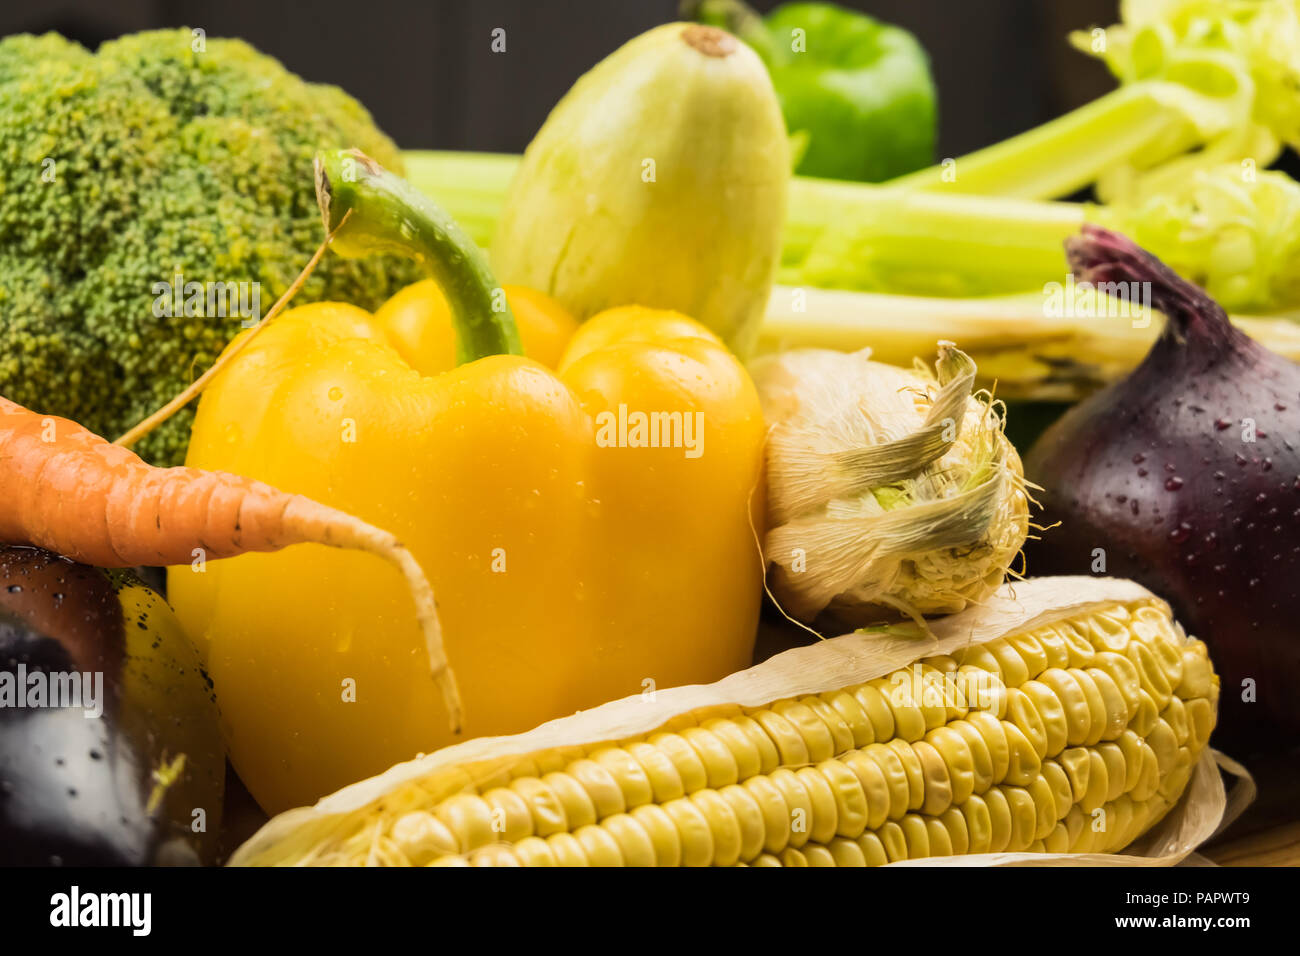 Locally grown bell pepper, corn and other natural vegan food laying on table. Close-up of fresh organic vegetables Stock Photo